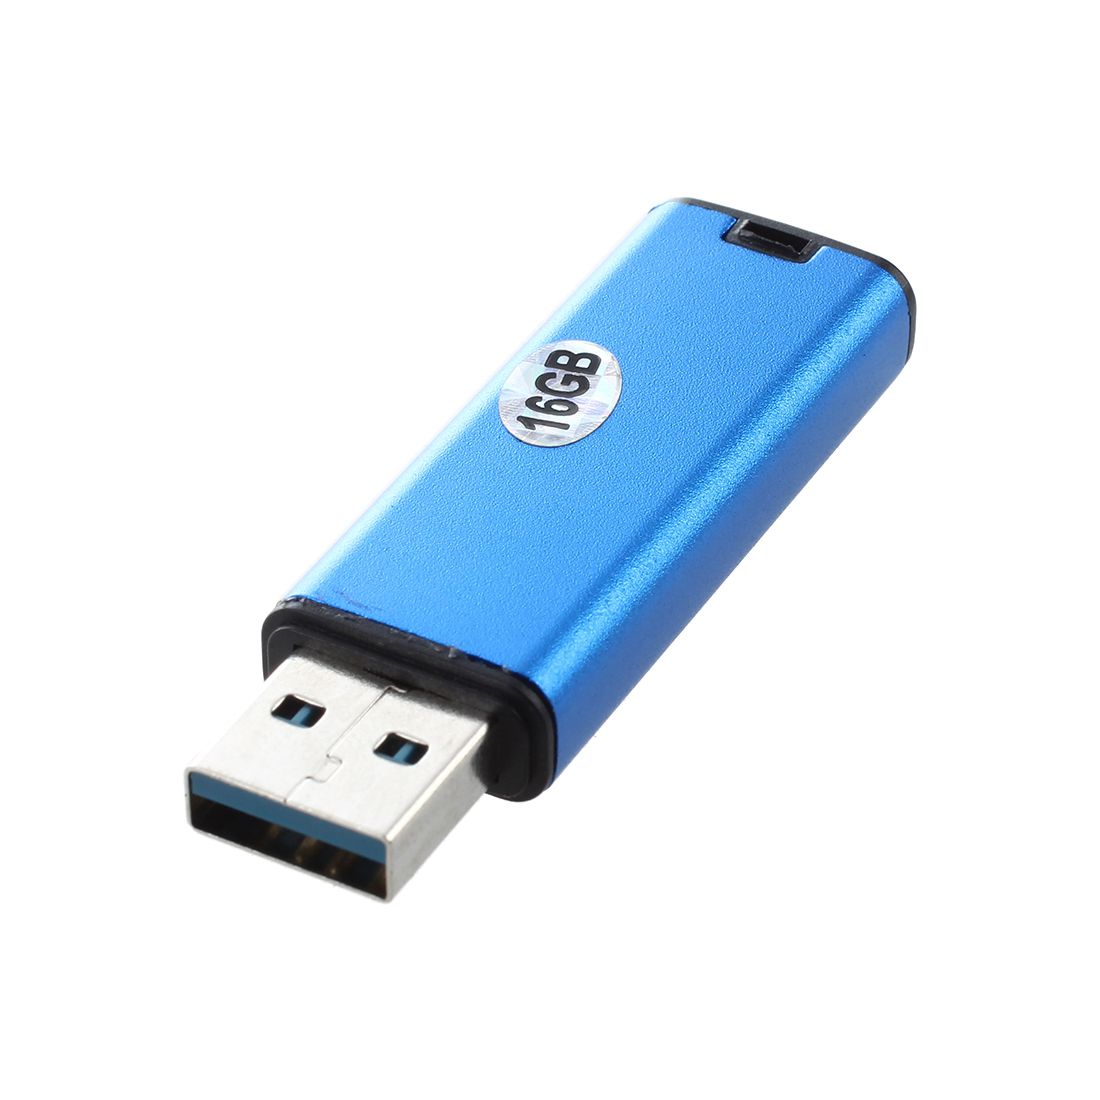 how to save document on a memory stick